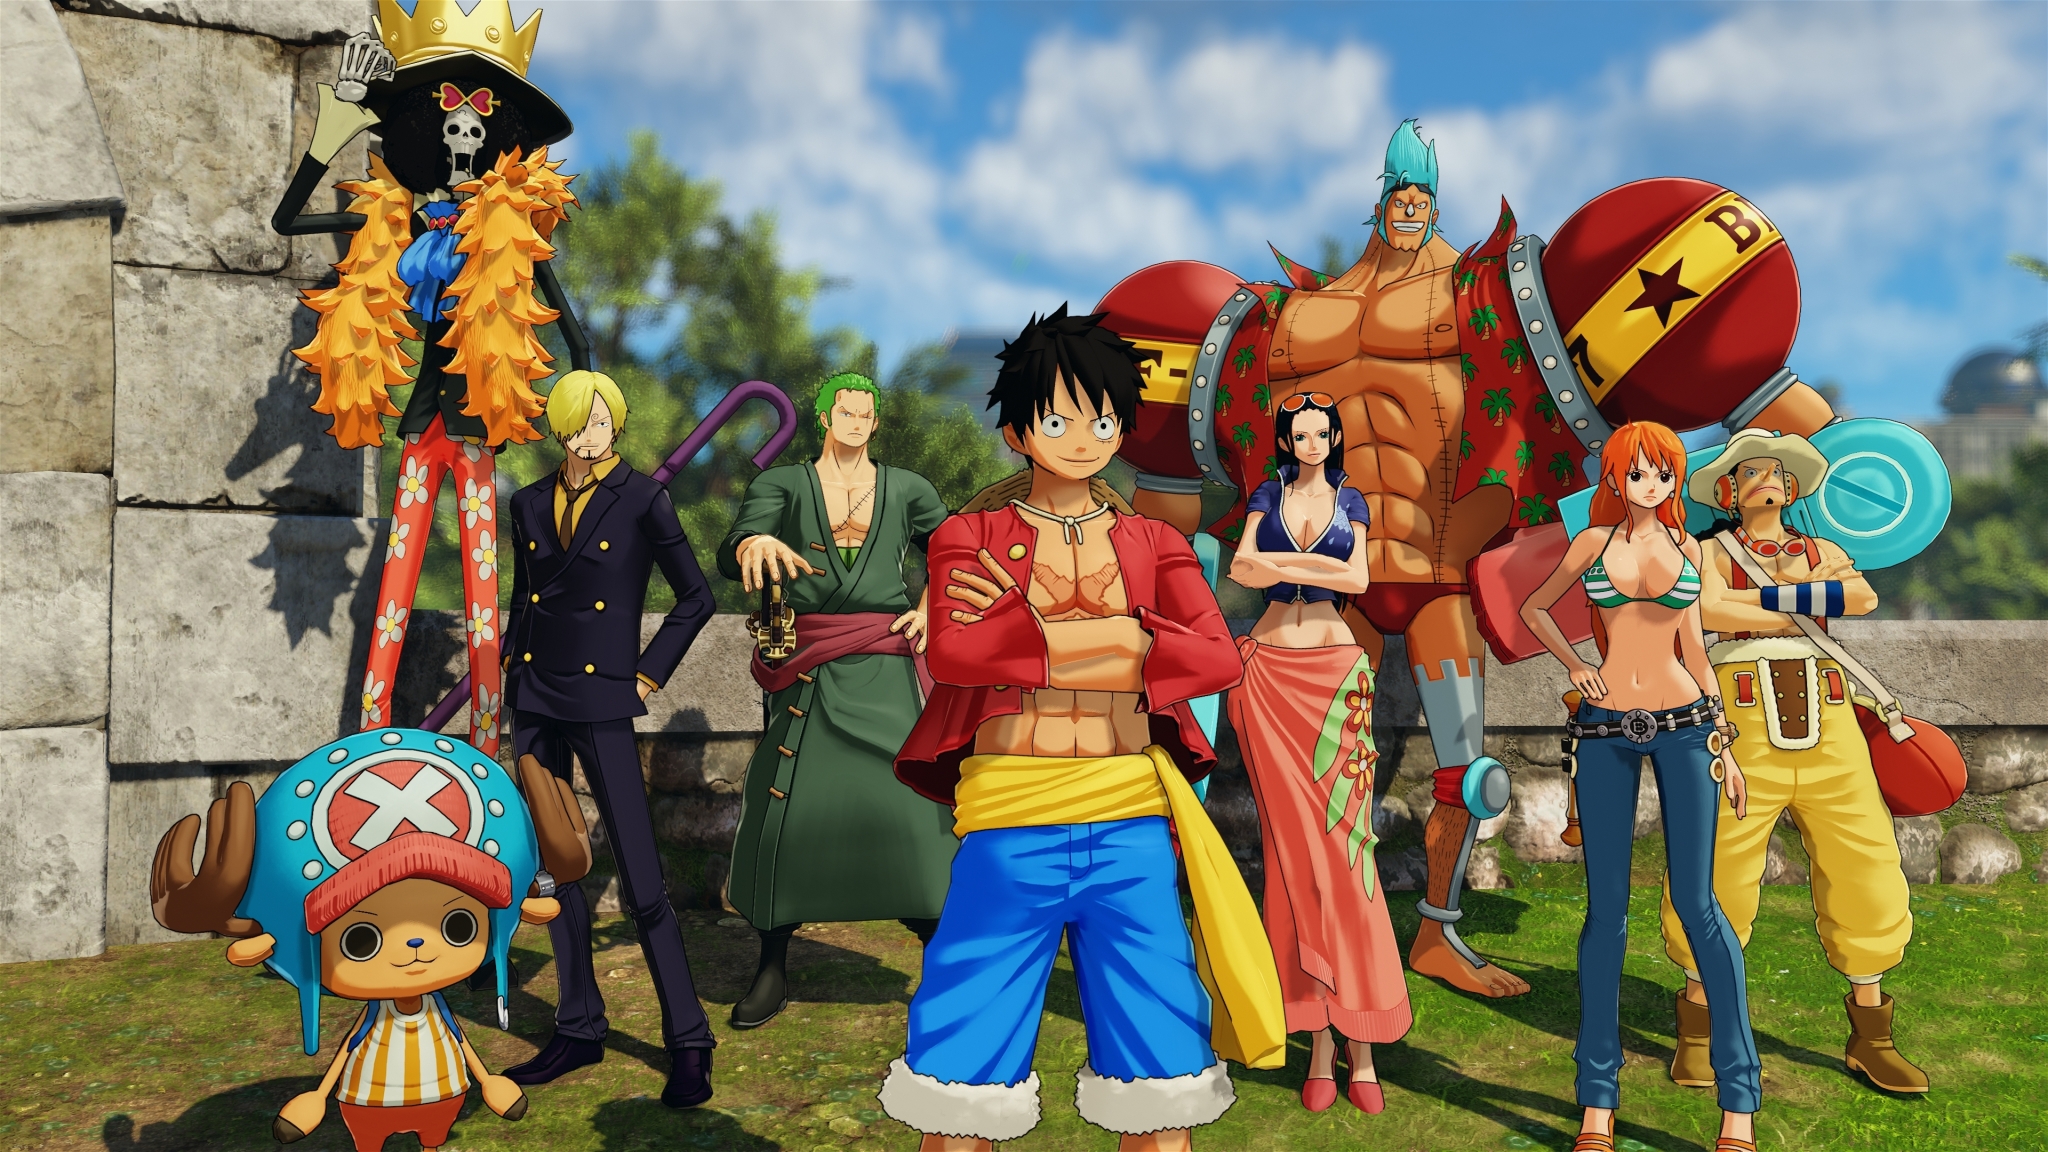 48x1152 One Piece World Seeker 4k 48x1152 Resolution Wallpaper Hd Games 4k Wallpapers Images Photos And Background Wallpapers Den